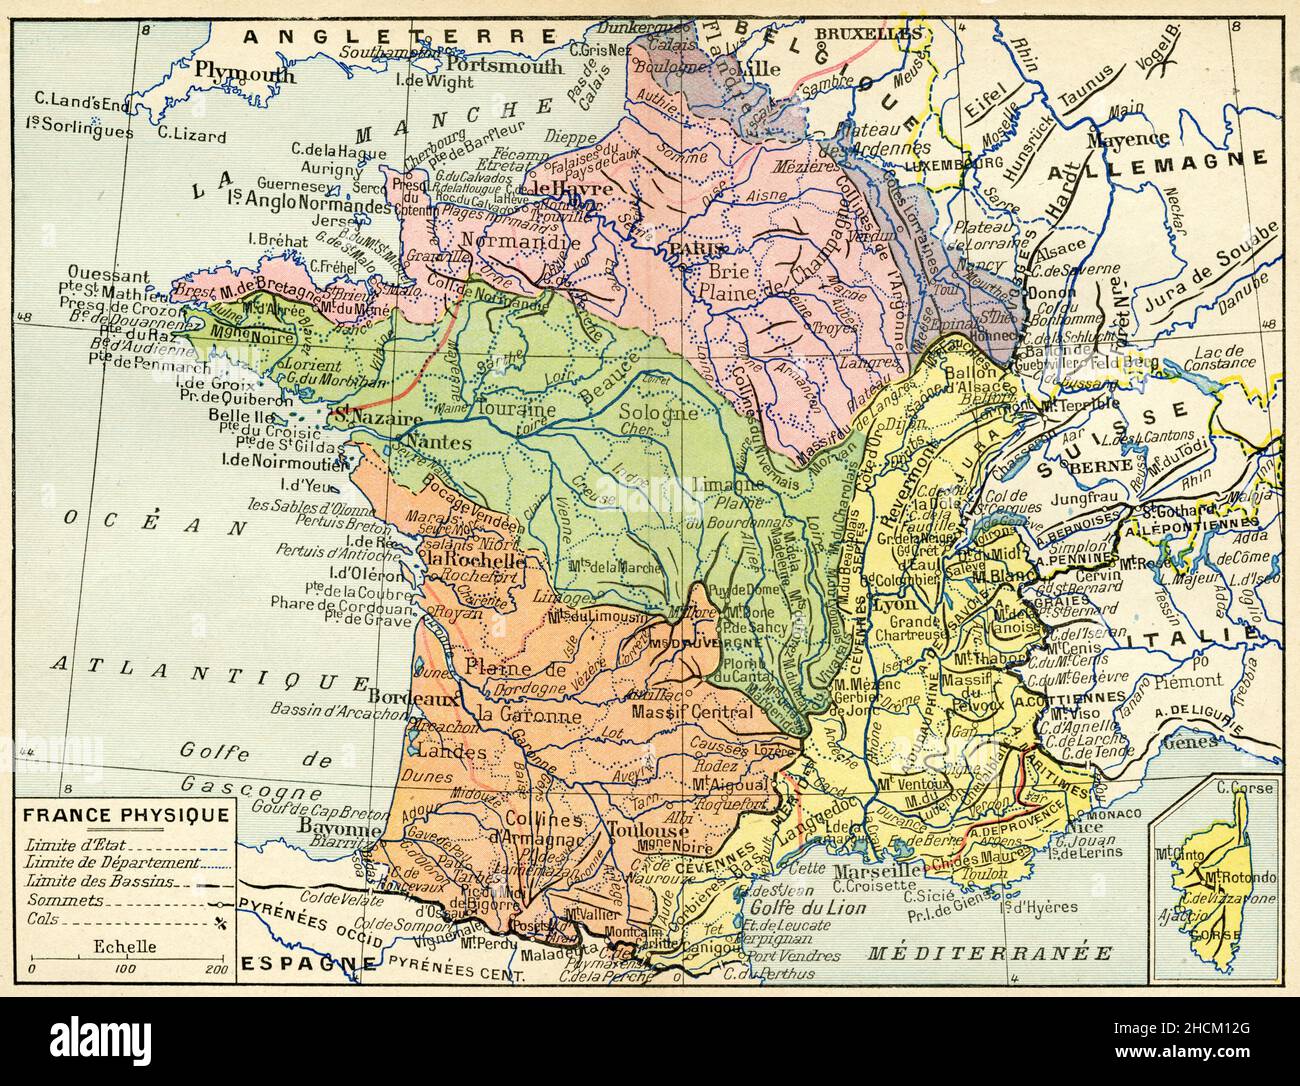 Carte Ancienne France Physique Stock Photo Alamy